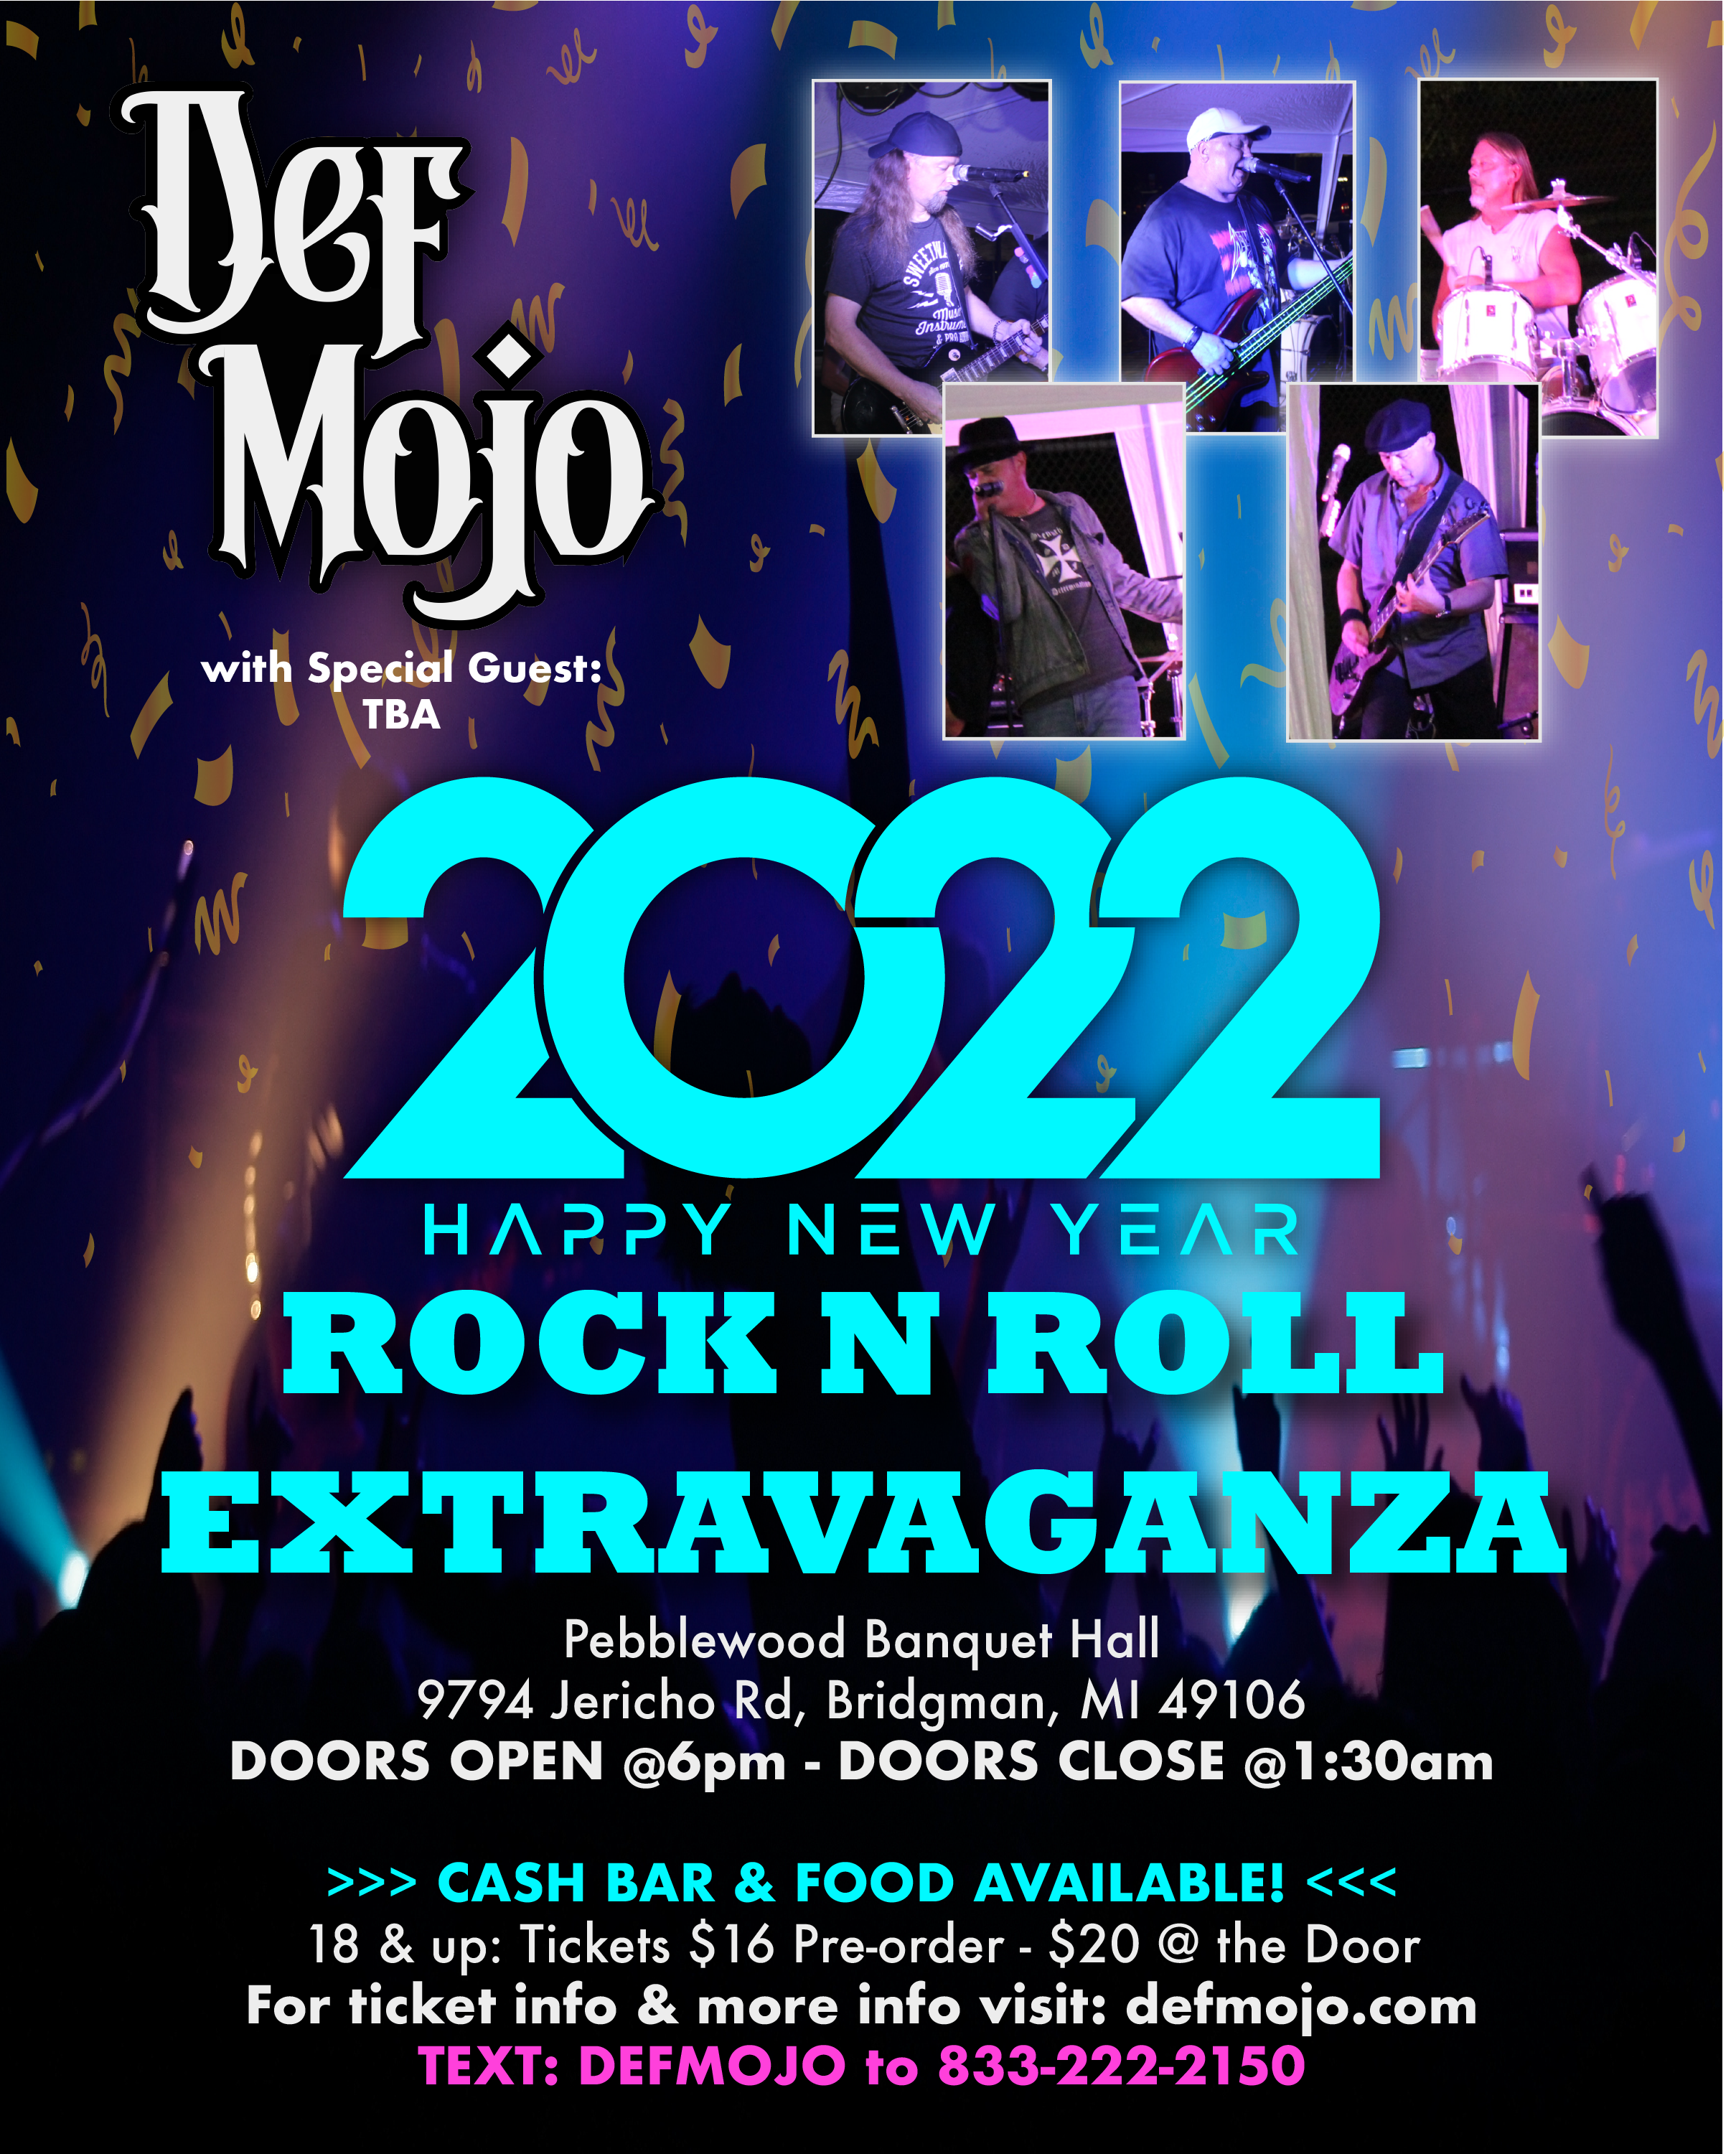 DEF MOJO NEW YEARS EVE EVENT - NO REFUNDS